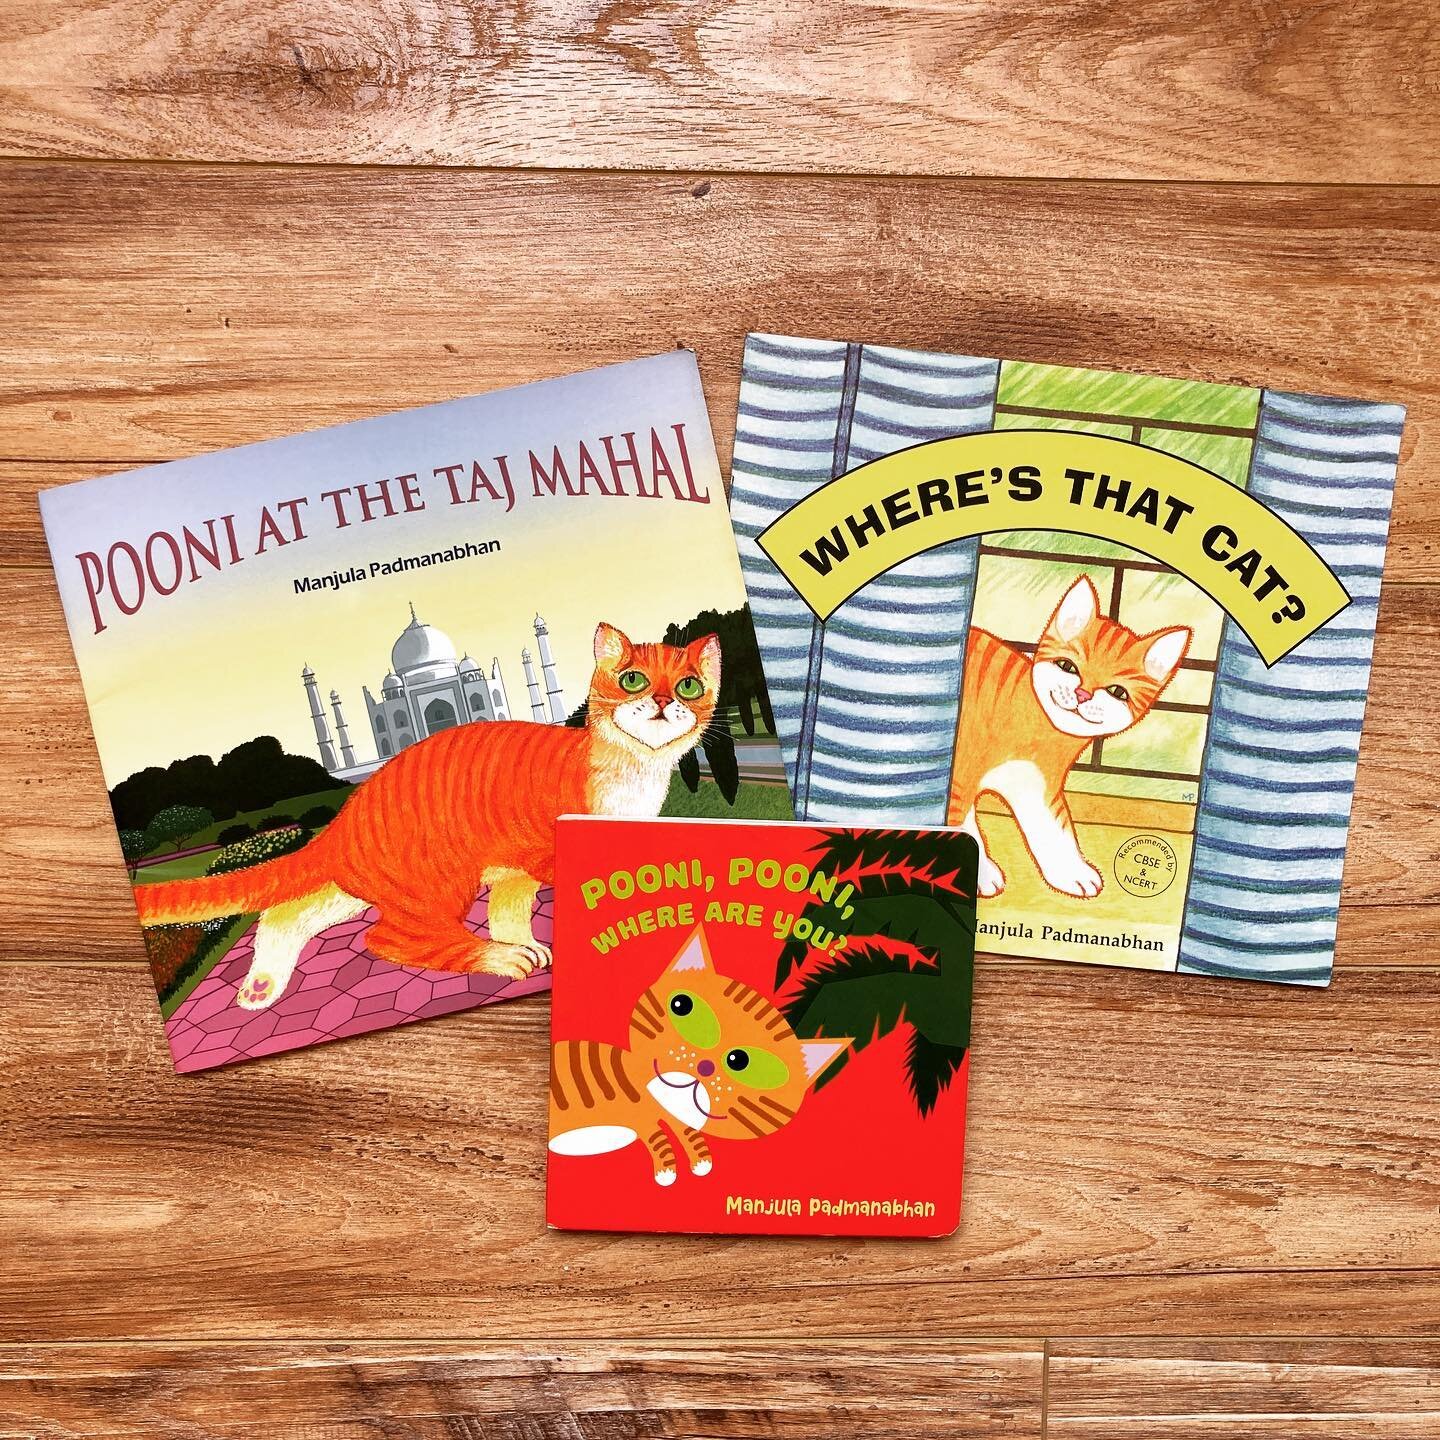 WHERE&rsquo;S POONI? 🐈

These three books written and illustrated by @manjulapadmanabhan and published by @tulikabooks, have been favourites ever since we received them about a month ago.

They follow the adventures of Pooni the cat, who is forever 